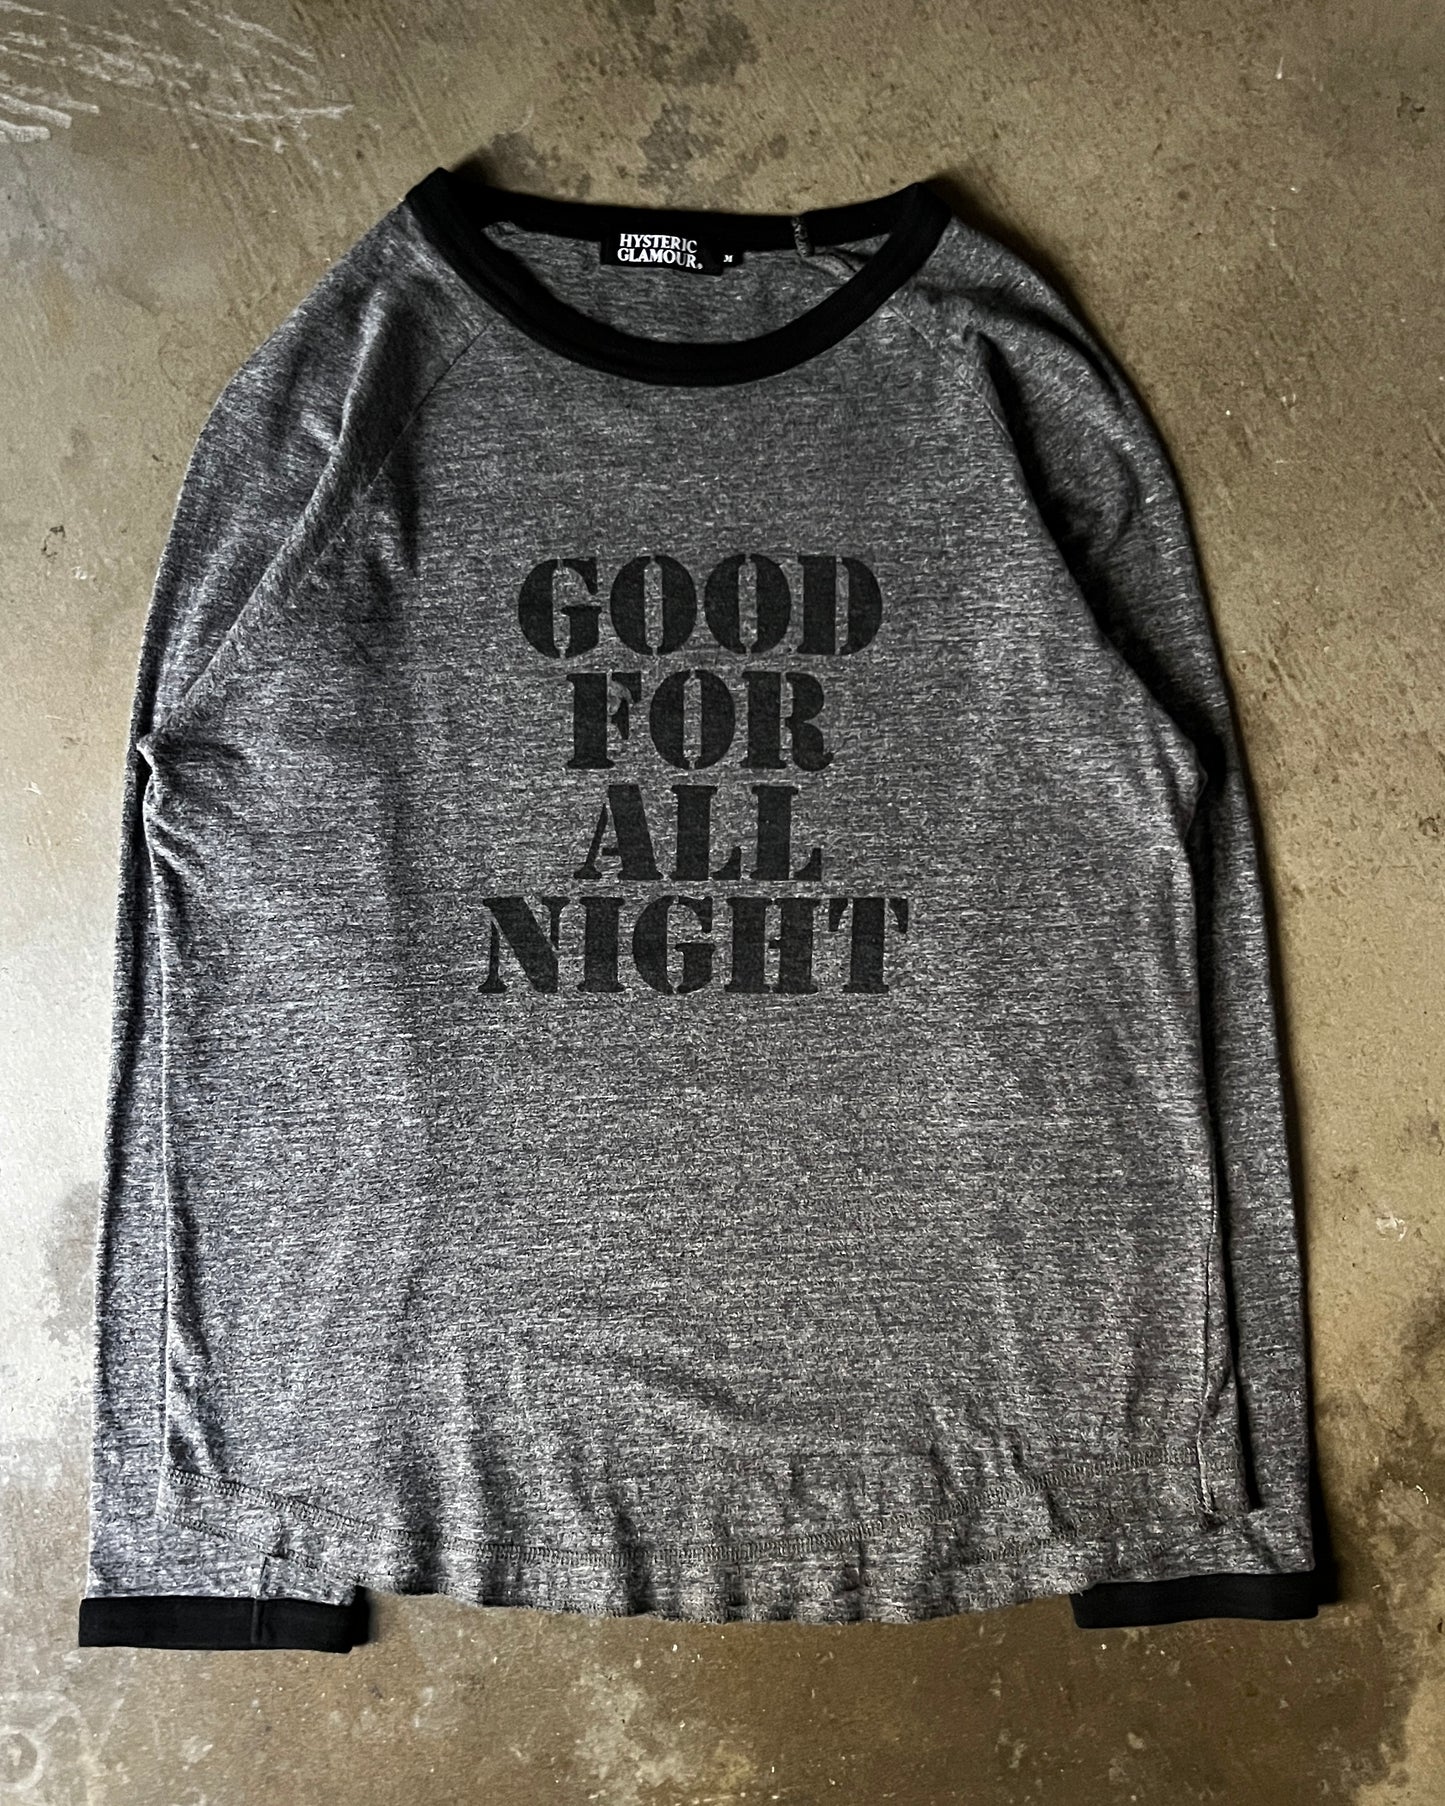 Hysteric Glamour "All Night" Longsleeve